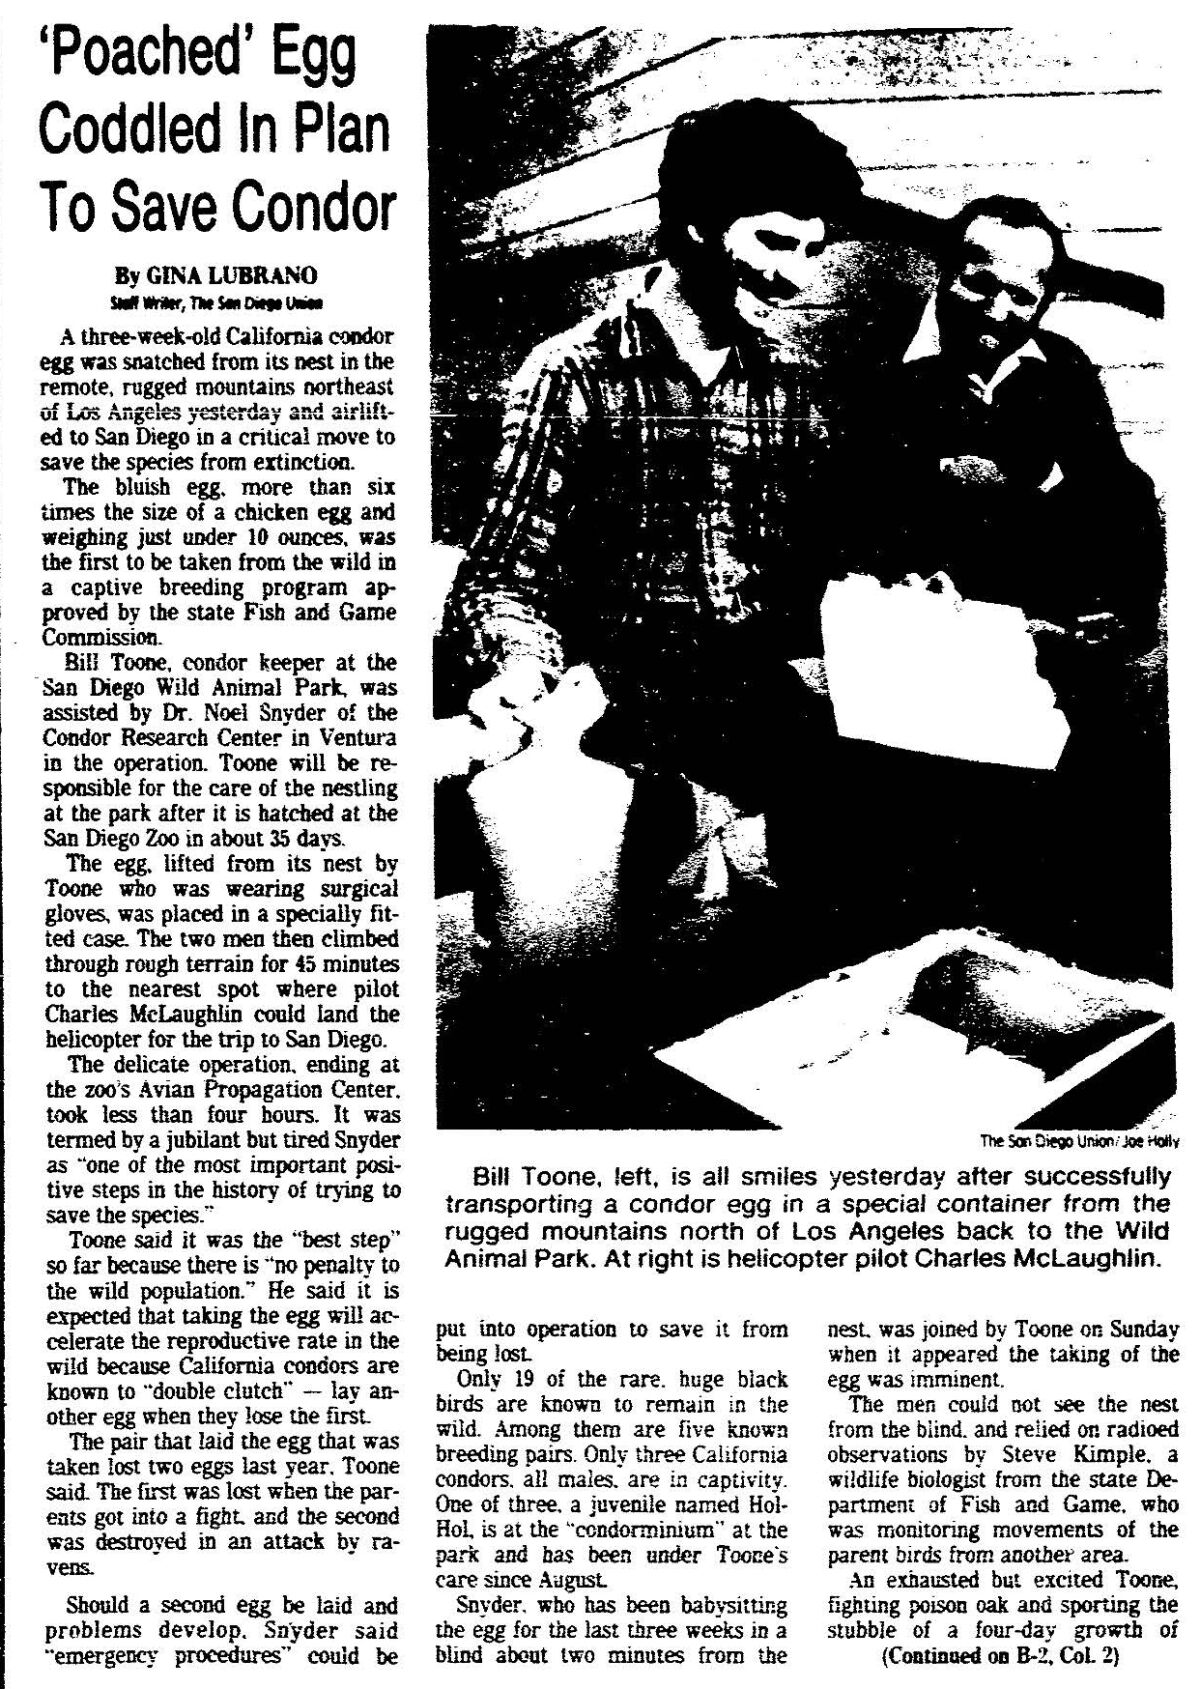 'Poached' egg coddled in plan to save Condor," from The San Diego Union, Feb. 24, 1983.